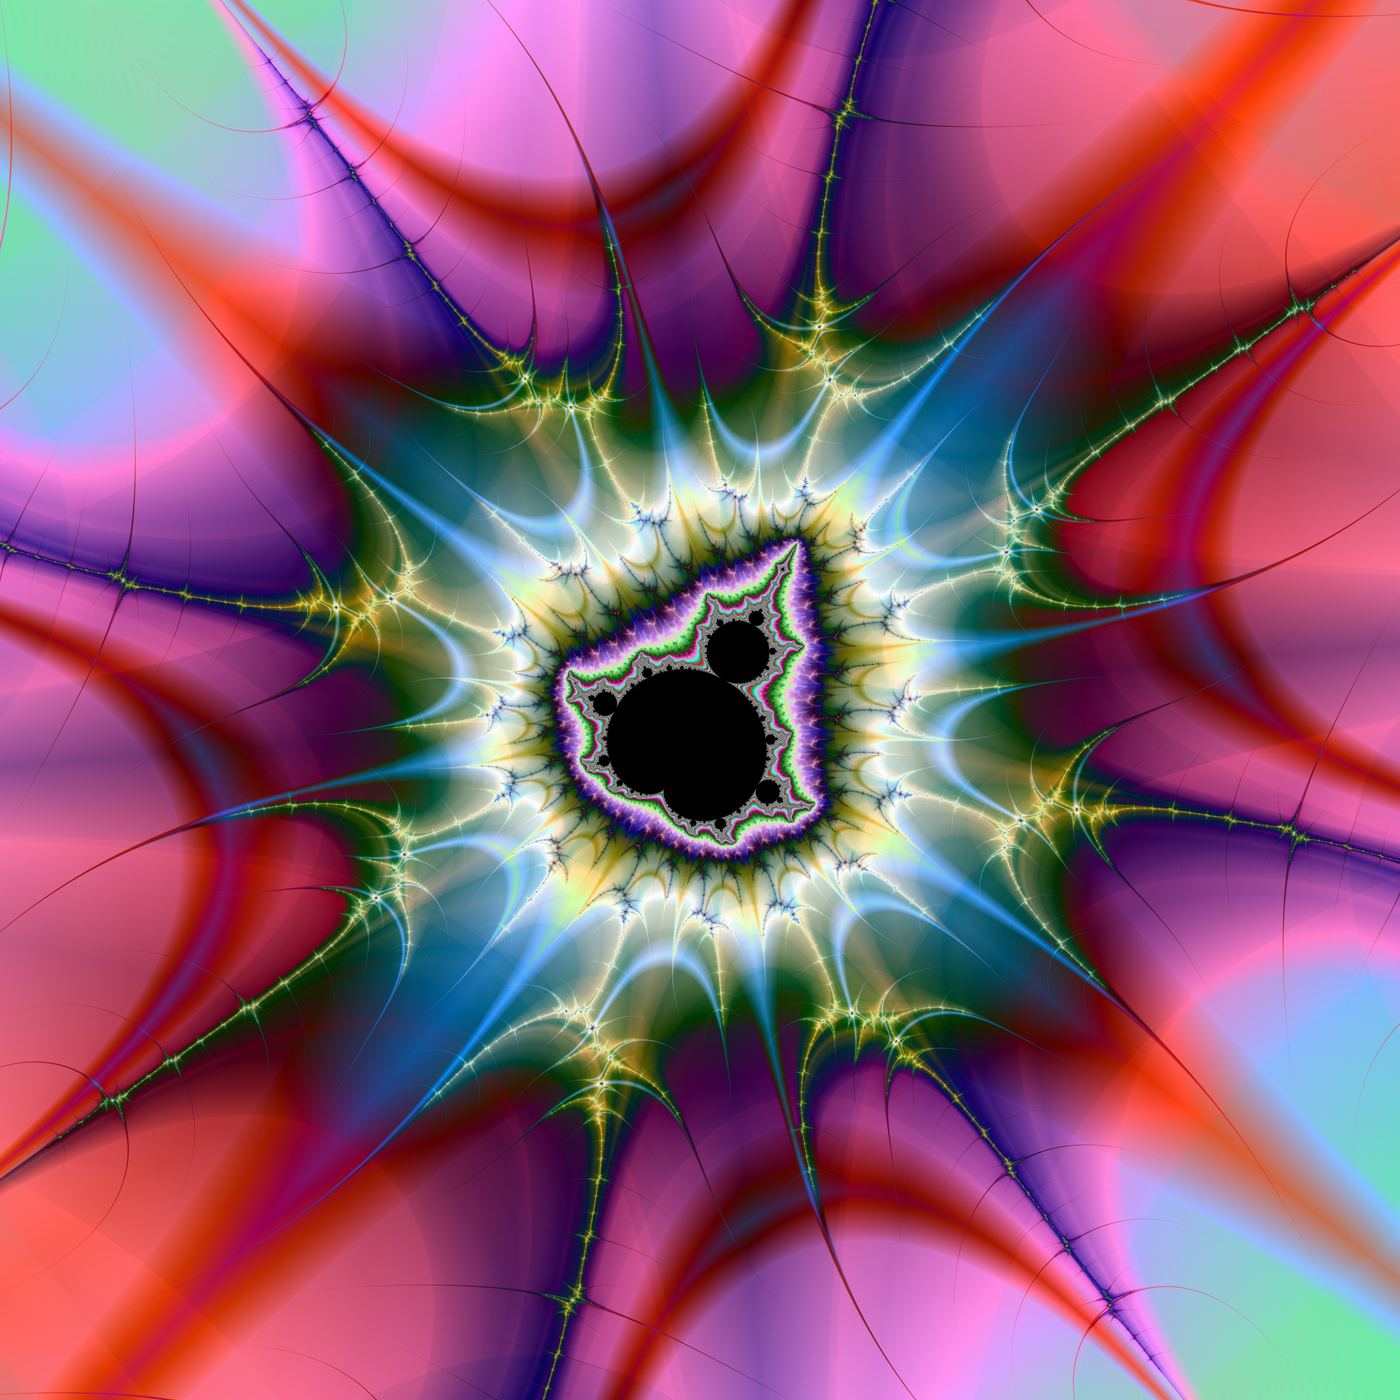 CANDY_SILK_BASED_ON_sunspot171015_1400.png